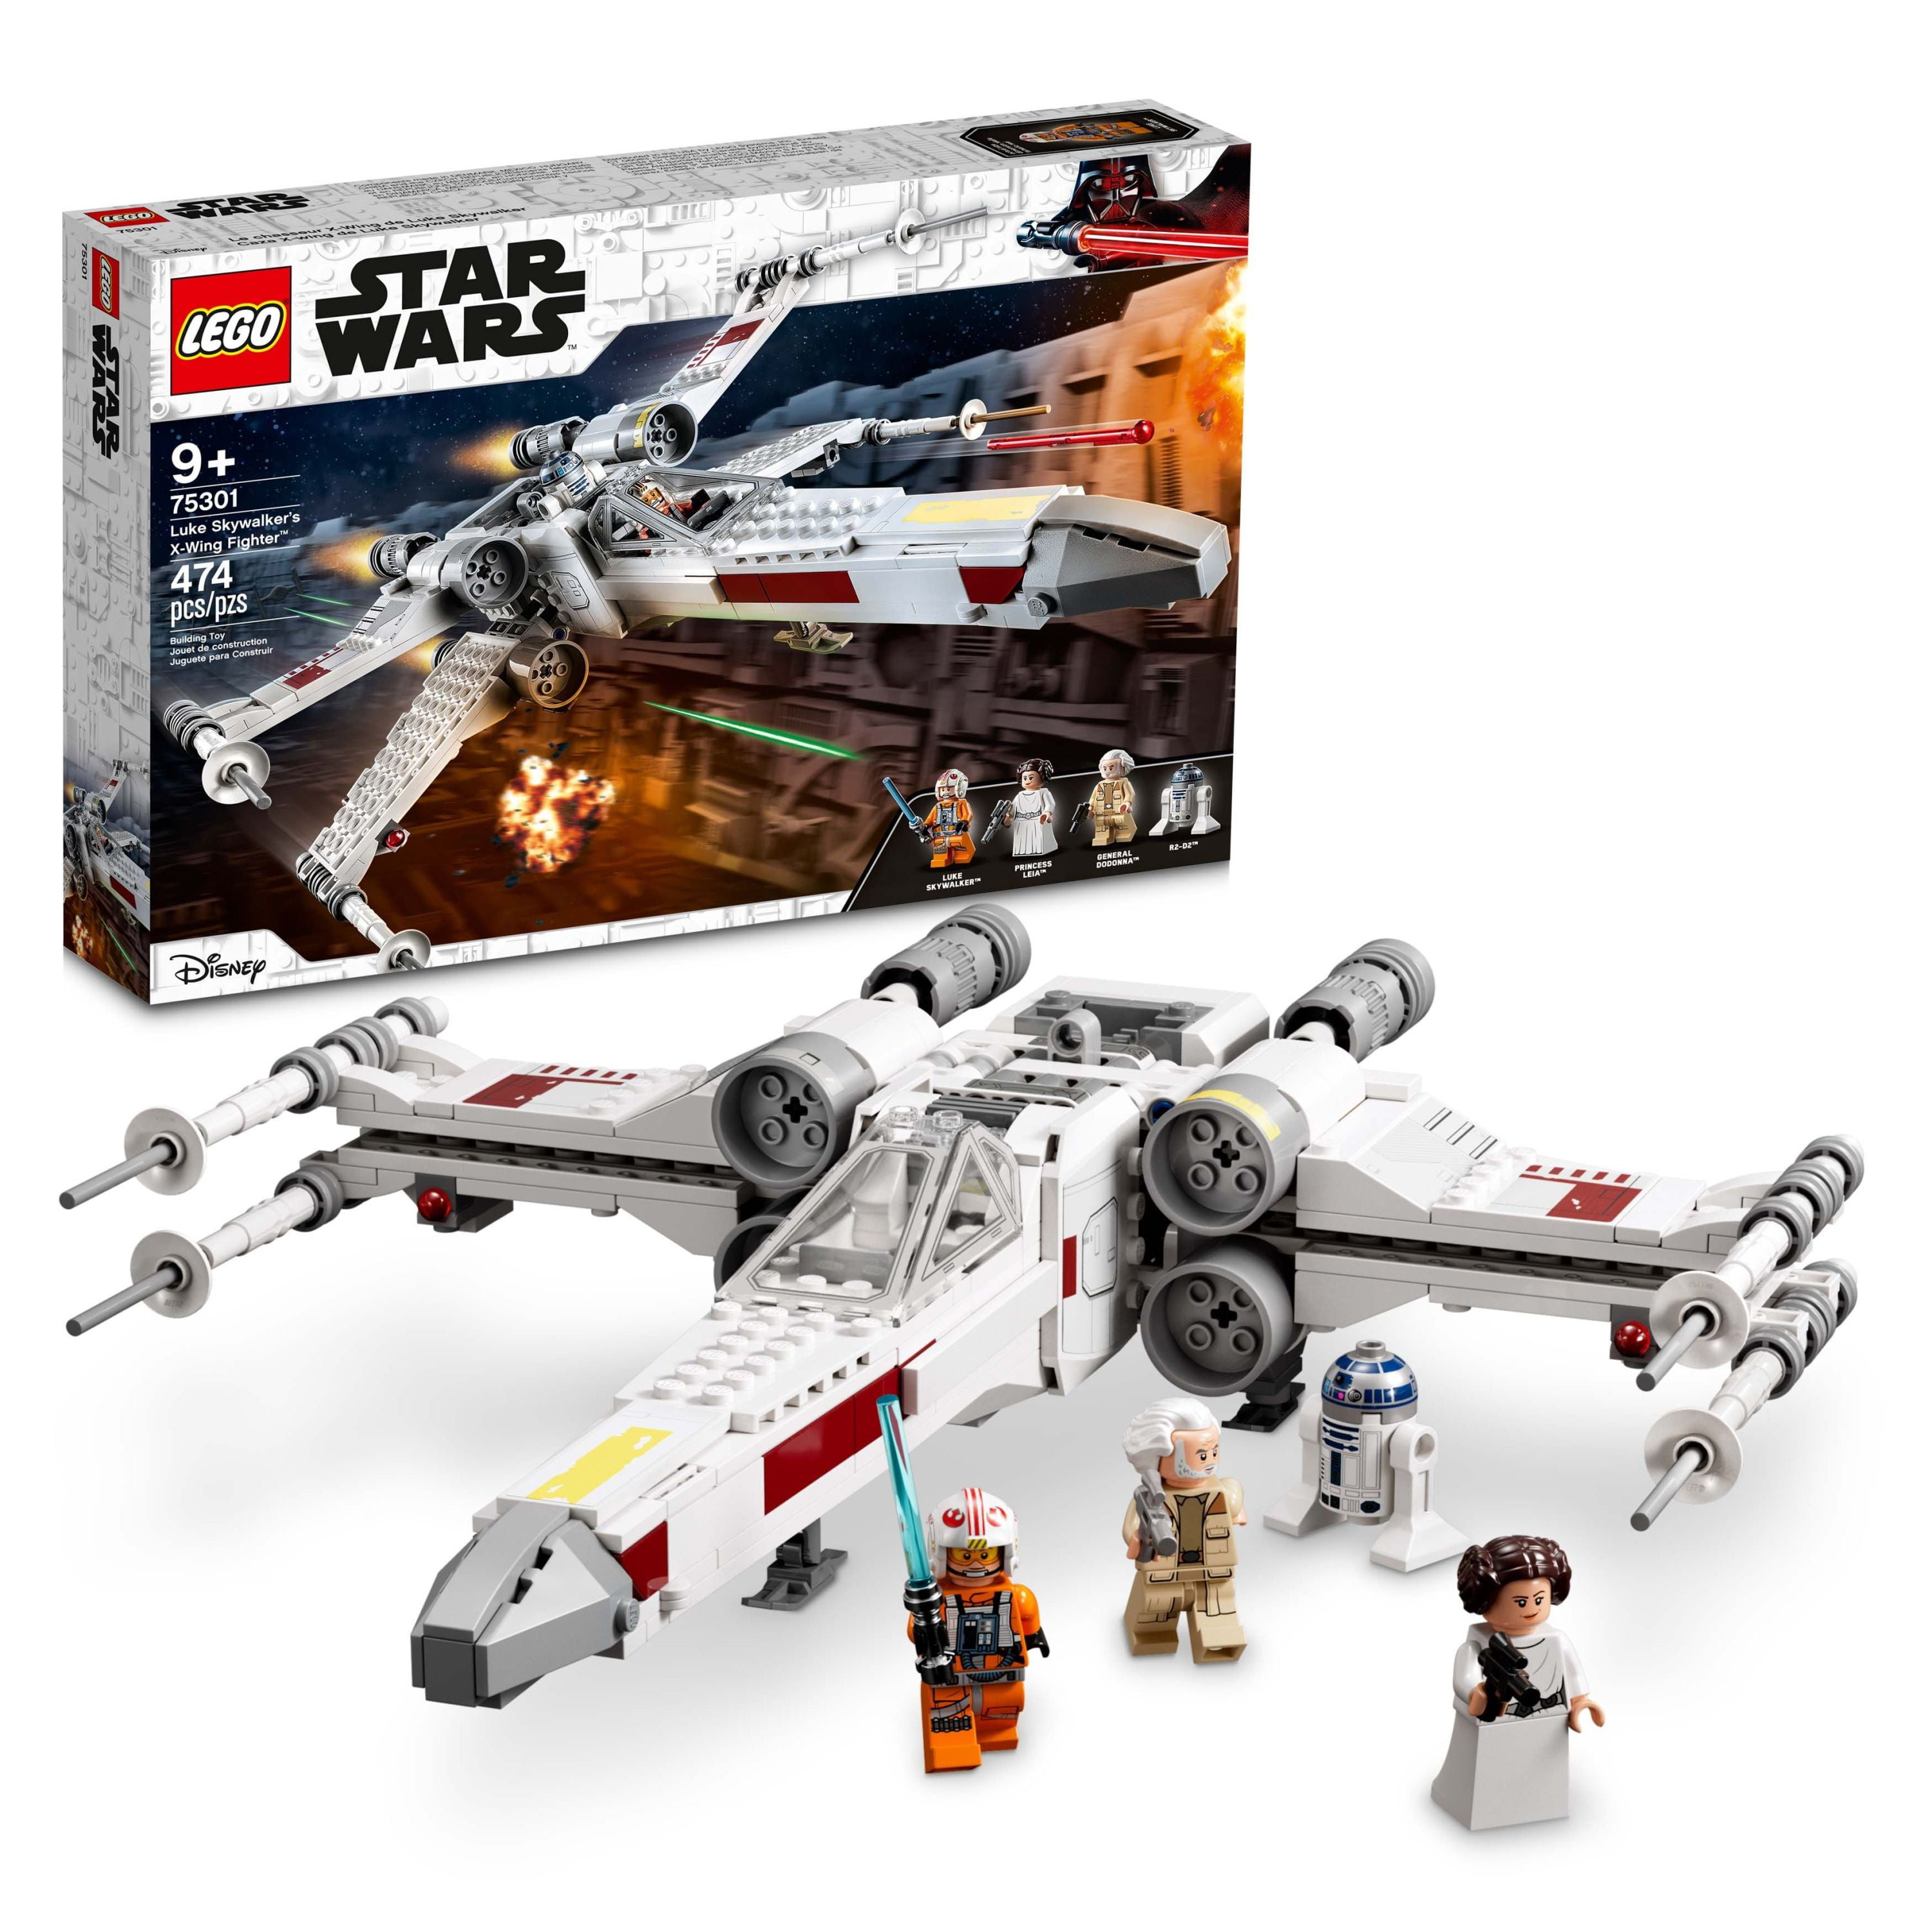 Star Wars Luke Skywalker's X-Wing Fighter 75301 Building Toy, Gifts for Kids, Boys & Girls with Princess Leia Minifigure and R2-D2 Droid Figure -